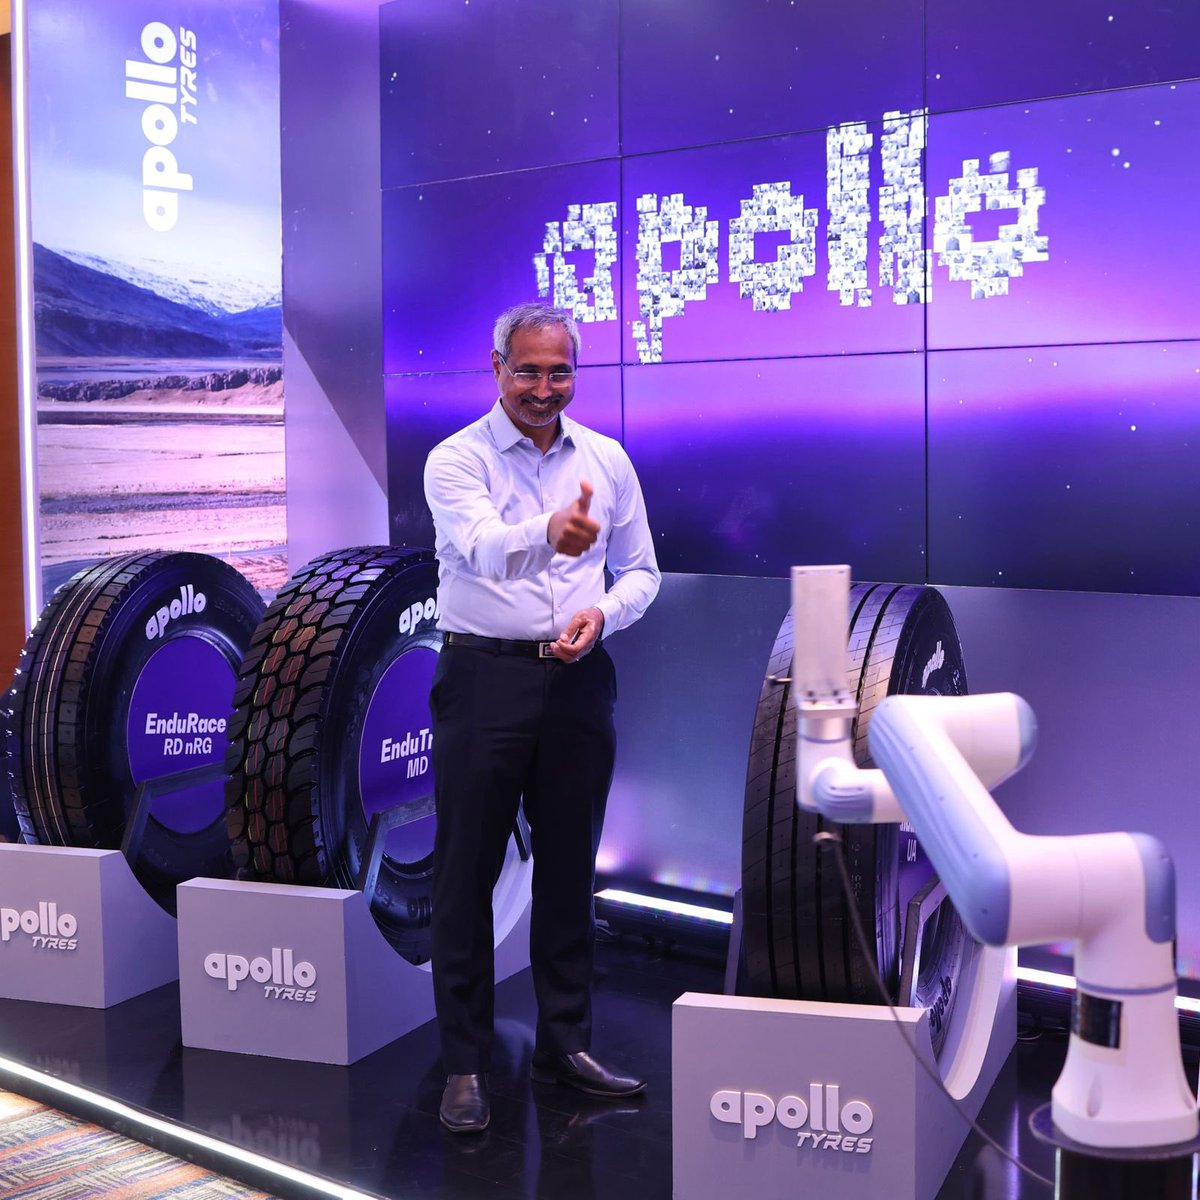 People are joining in on the excitement, taking part in engaging activities and sharing their candid reactions #ApolloCVAwards #ApolloTyres